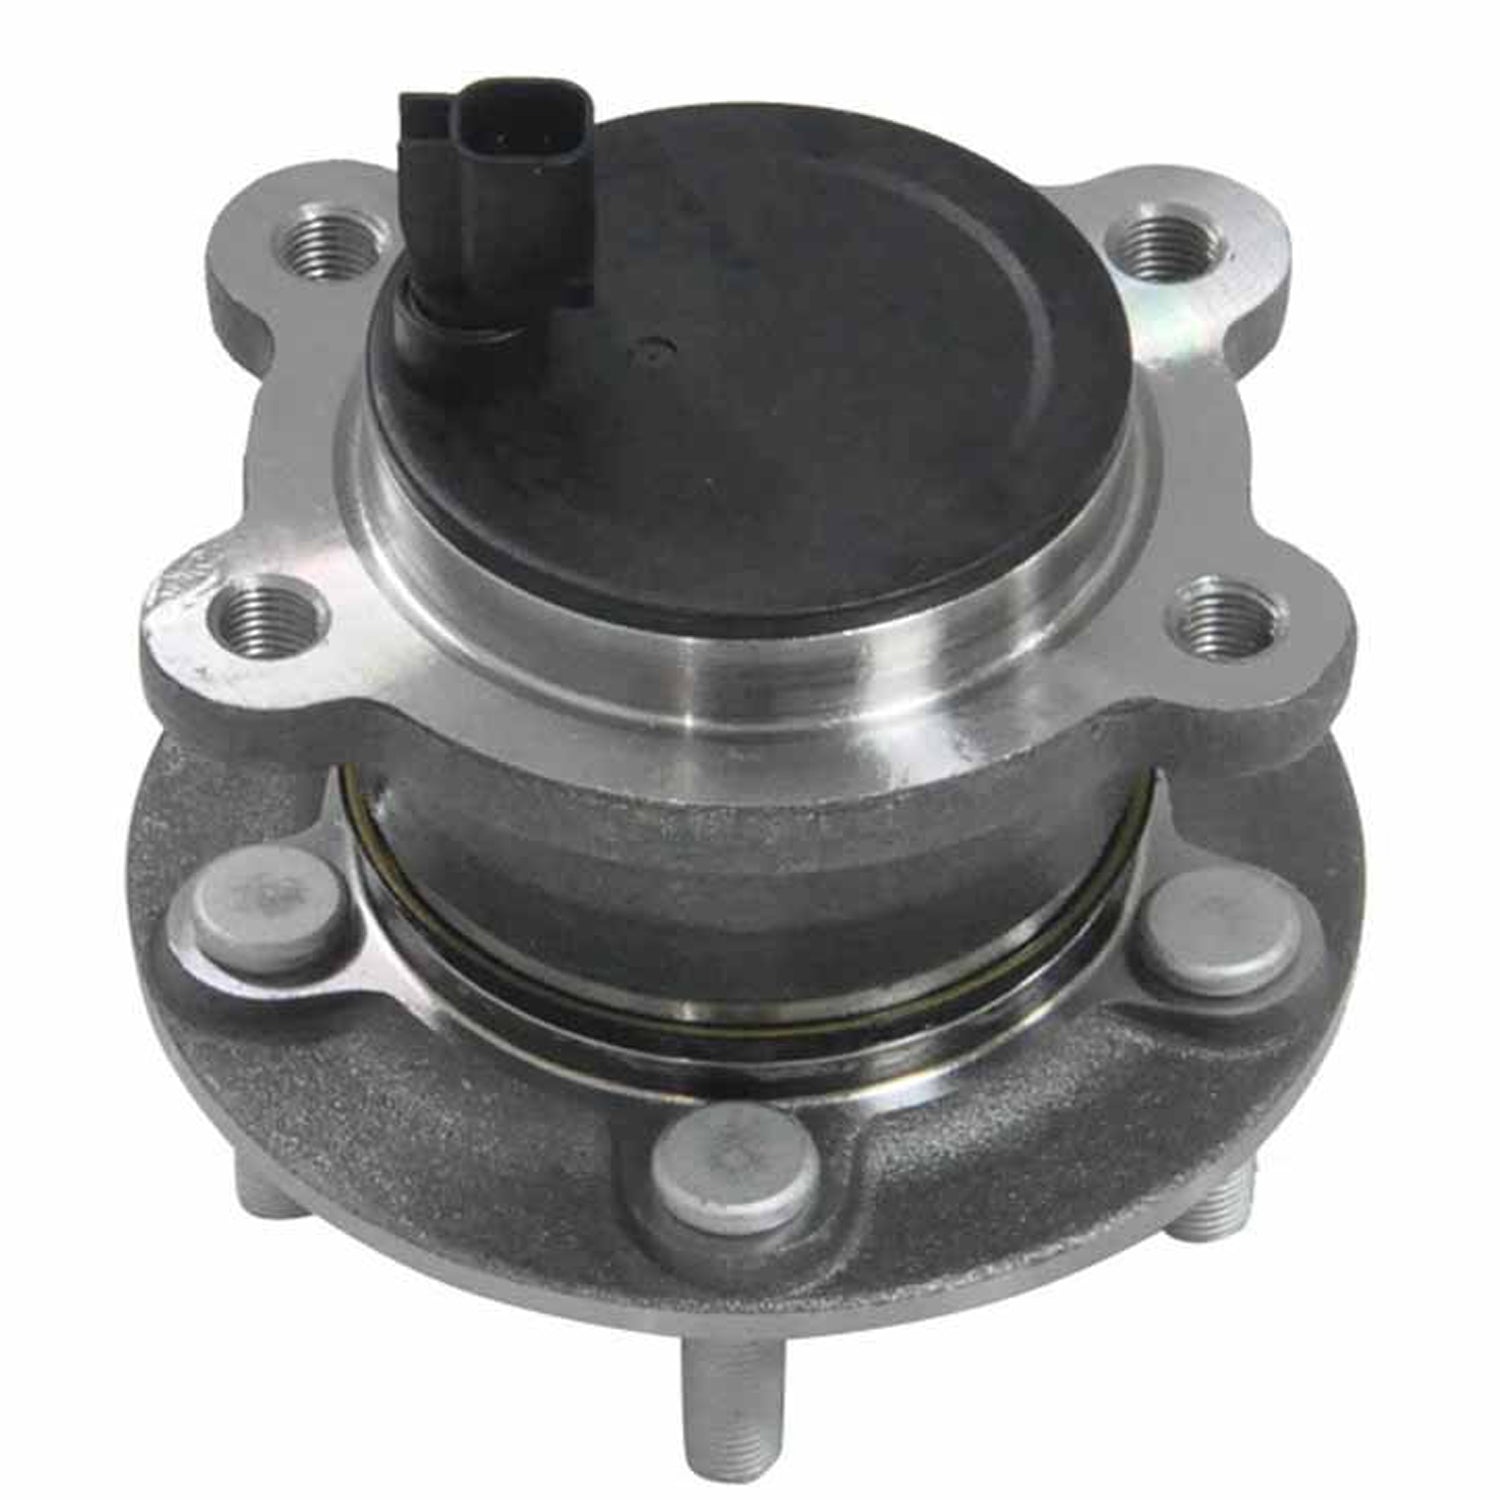 JADODE FWD Rear Wheel Hub & Bearing for Ford C-Max Escape 15-19 Lincoln MKC 5 Lug